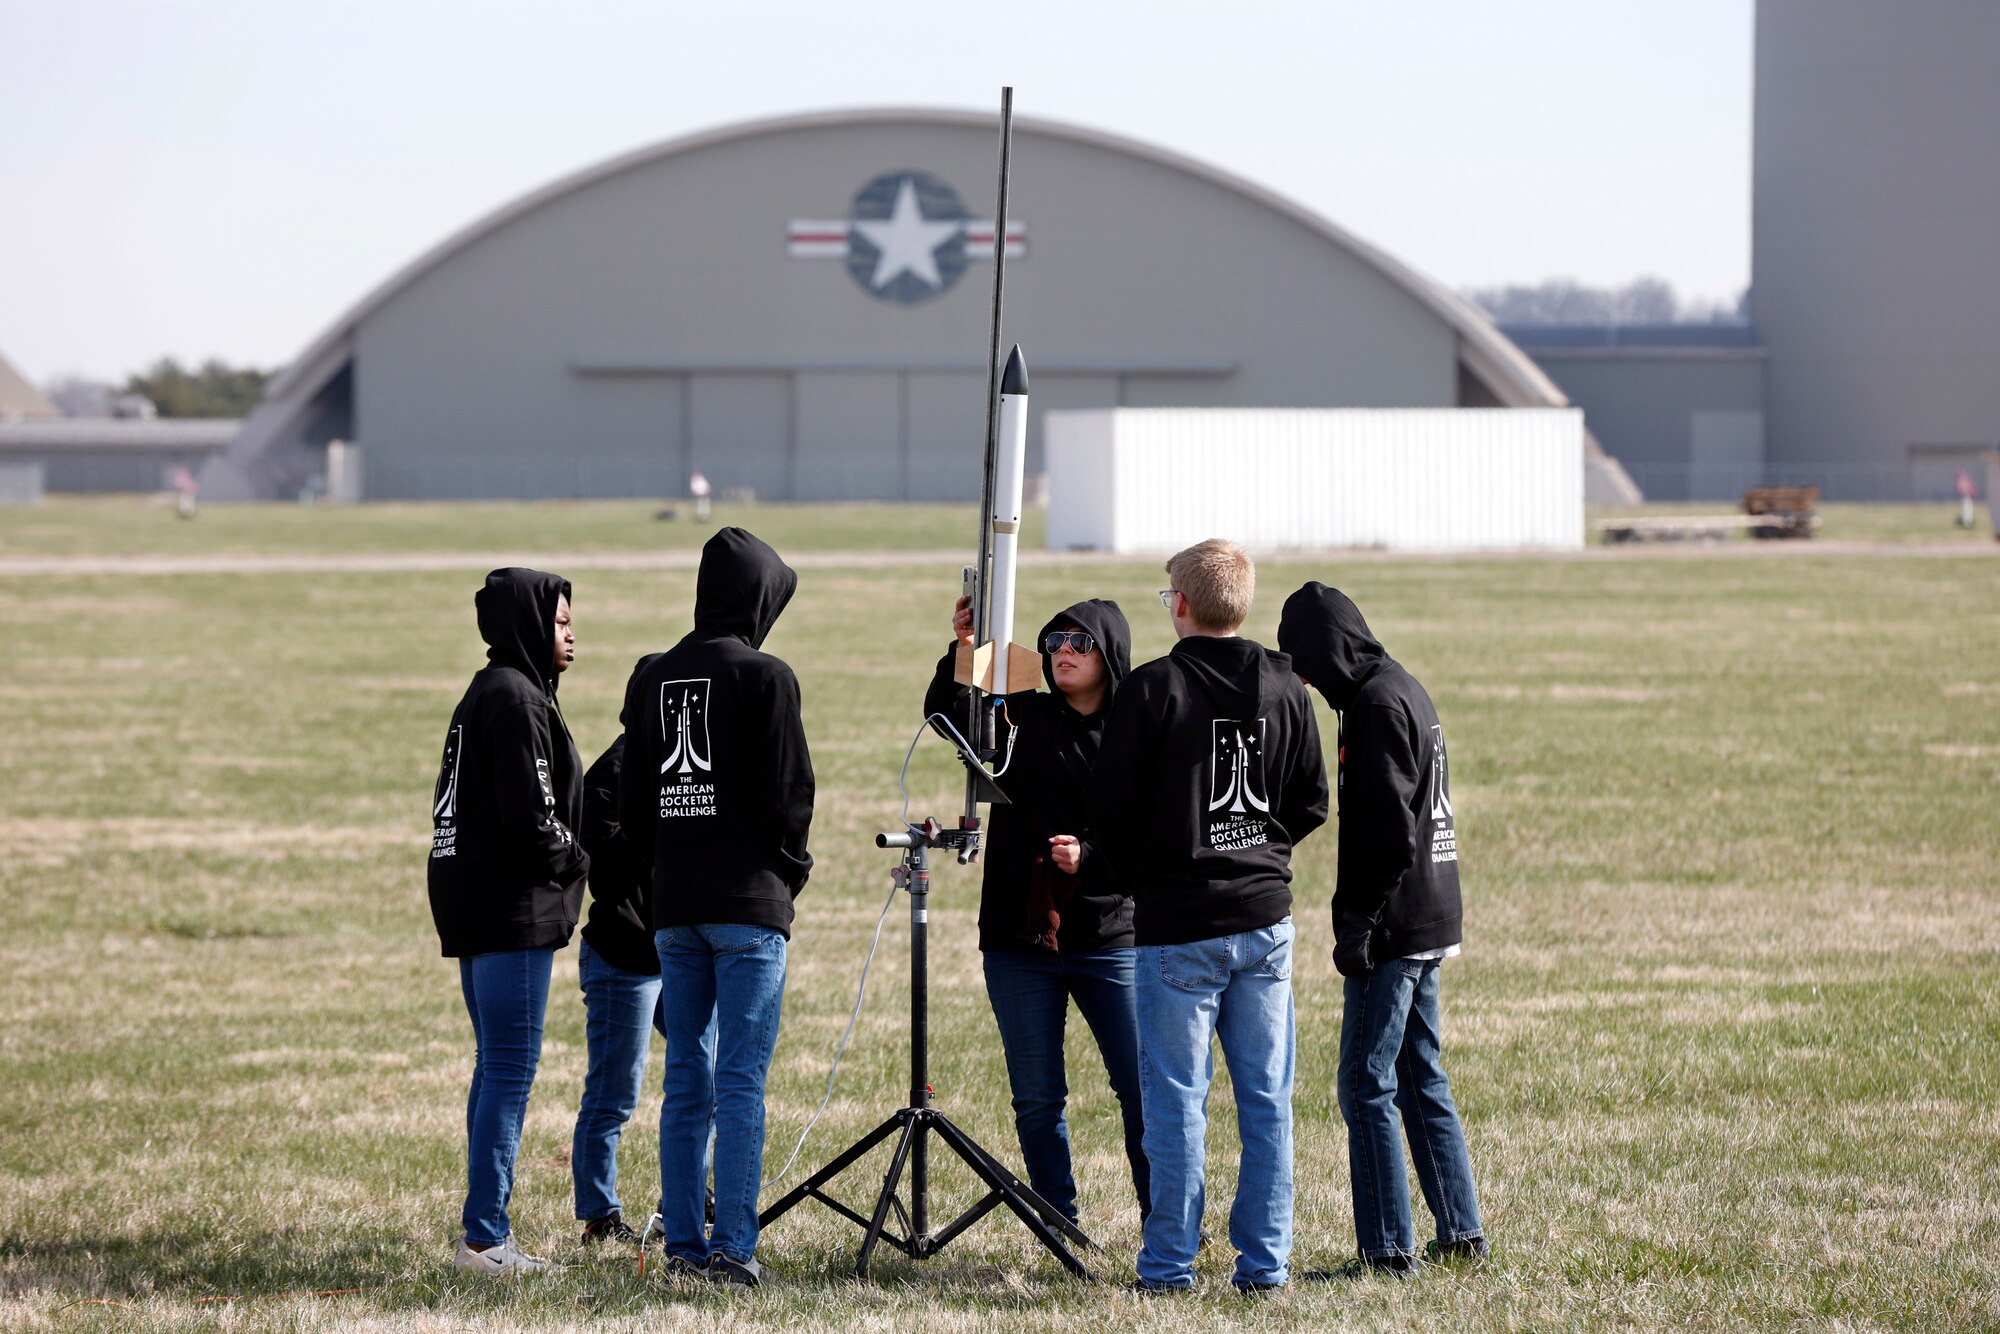 A rocketry team from the National Museum of the U.S. Air Force has advanced to The American Rocketry Challenge National Finals to be held near Washington, D.C. on Saturday, May 14.